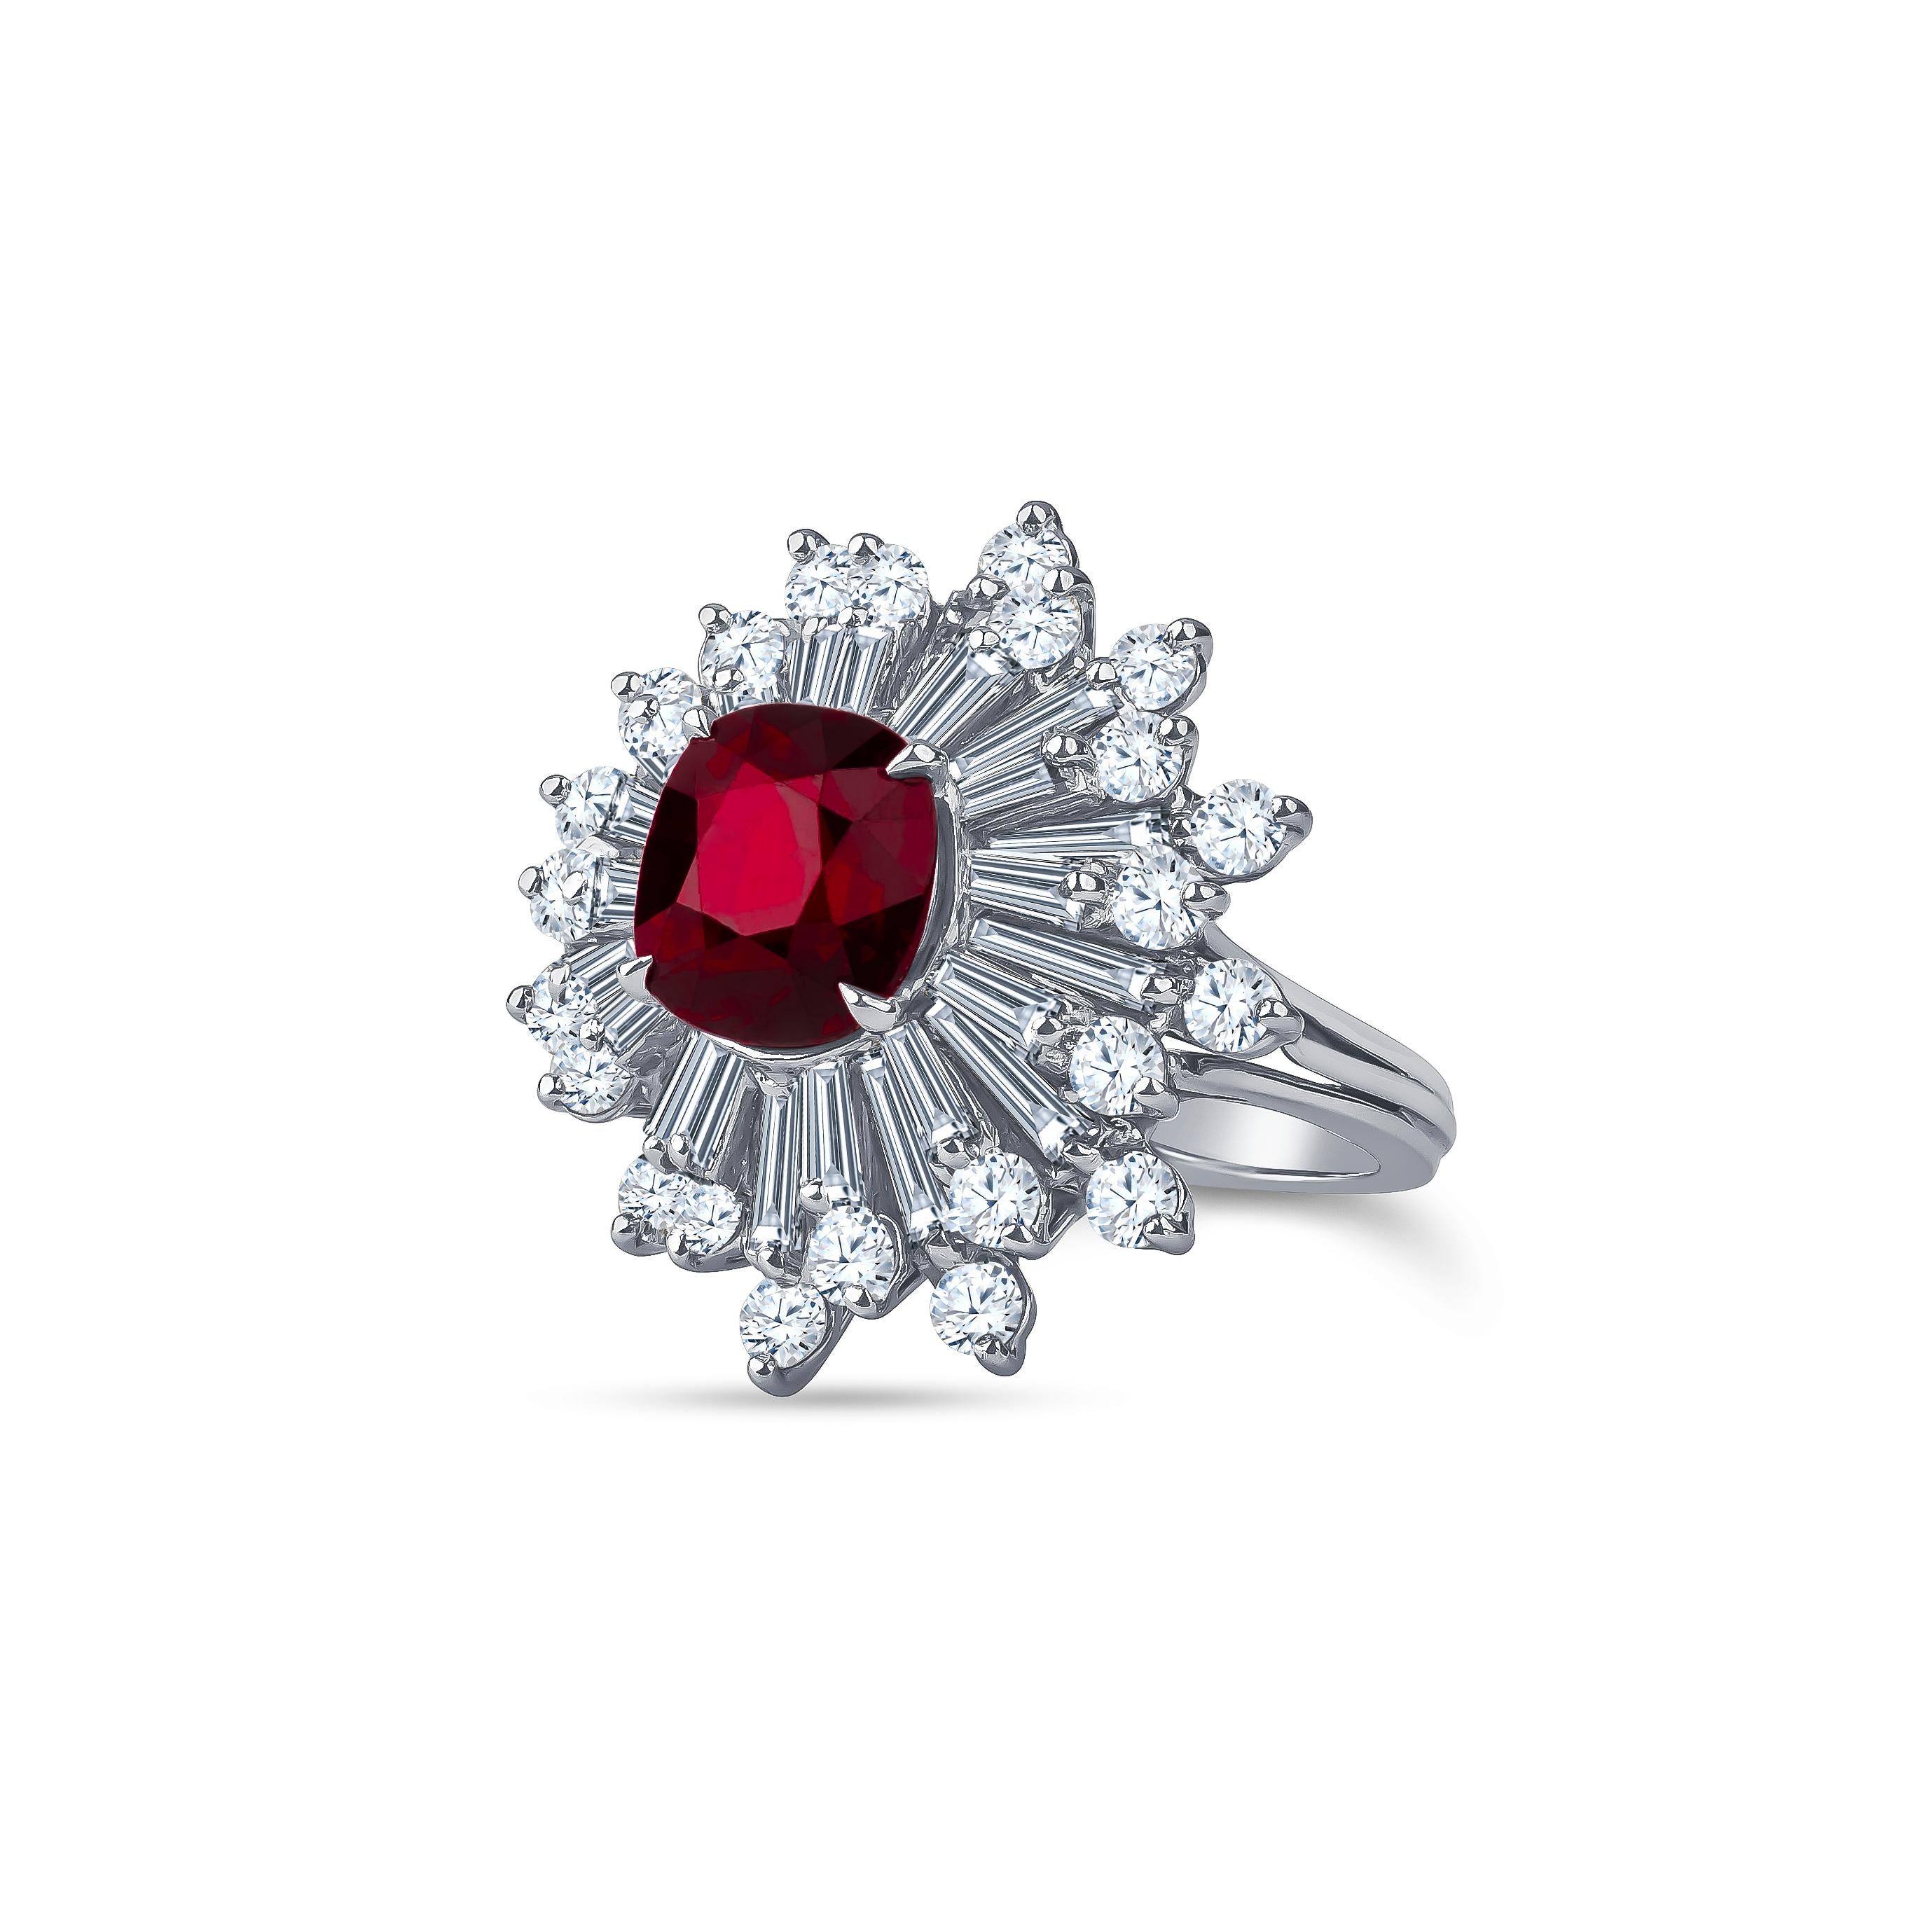 3.97 Carat Ruby (GIA report) center ring with fine baguette and round diamonds all around set in platinum. Ring size 6.5, size is resize-able to larger or smaller upon request. 

Ruby measurements: 9.05x8.20x6.35mm